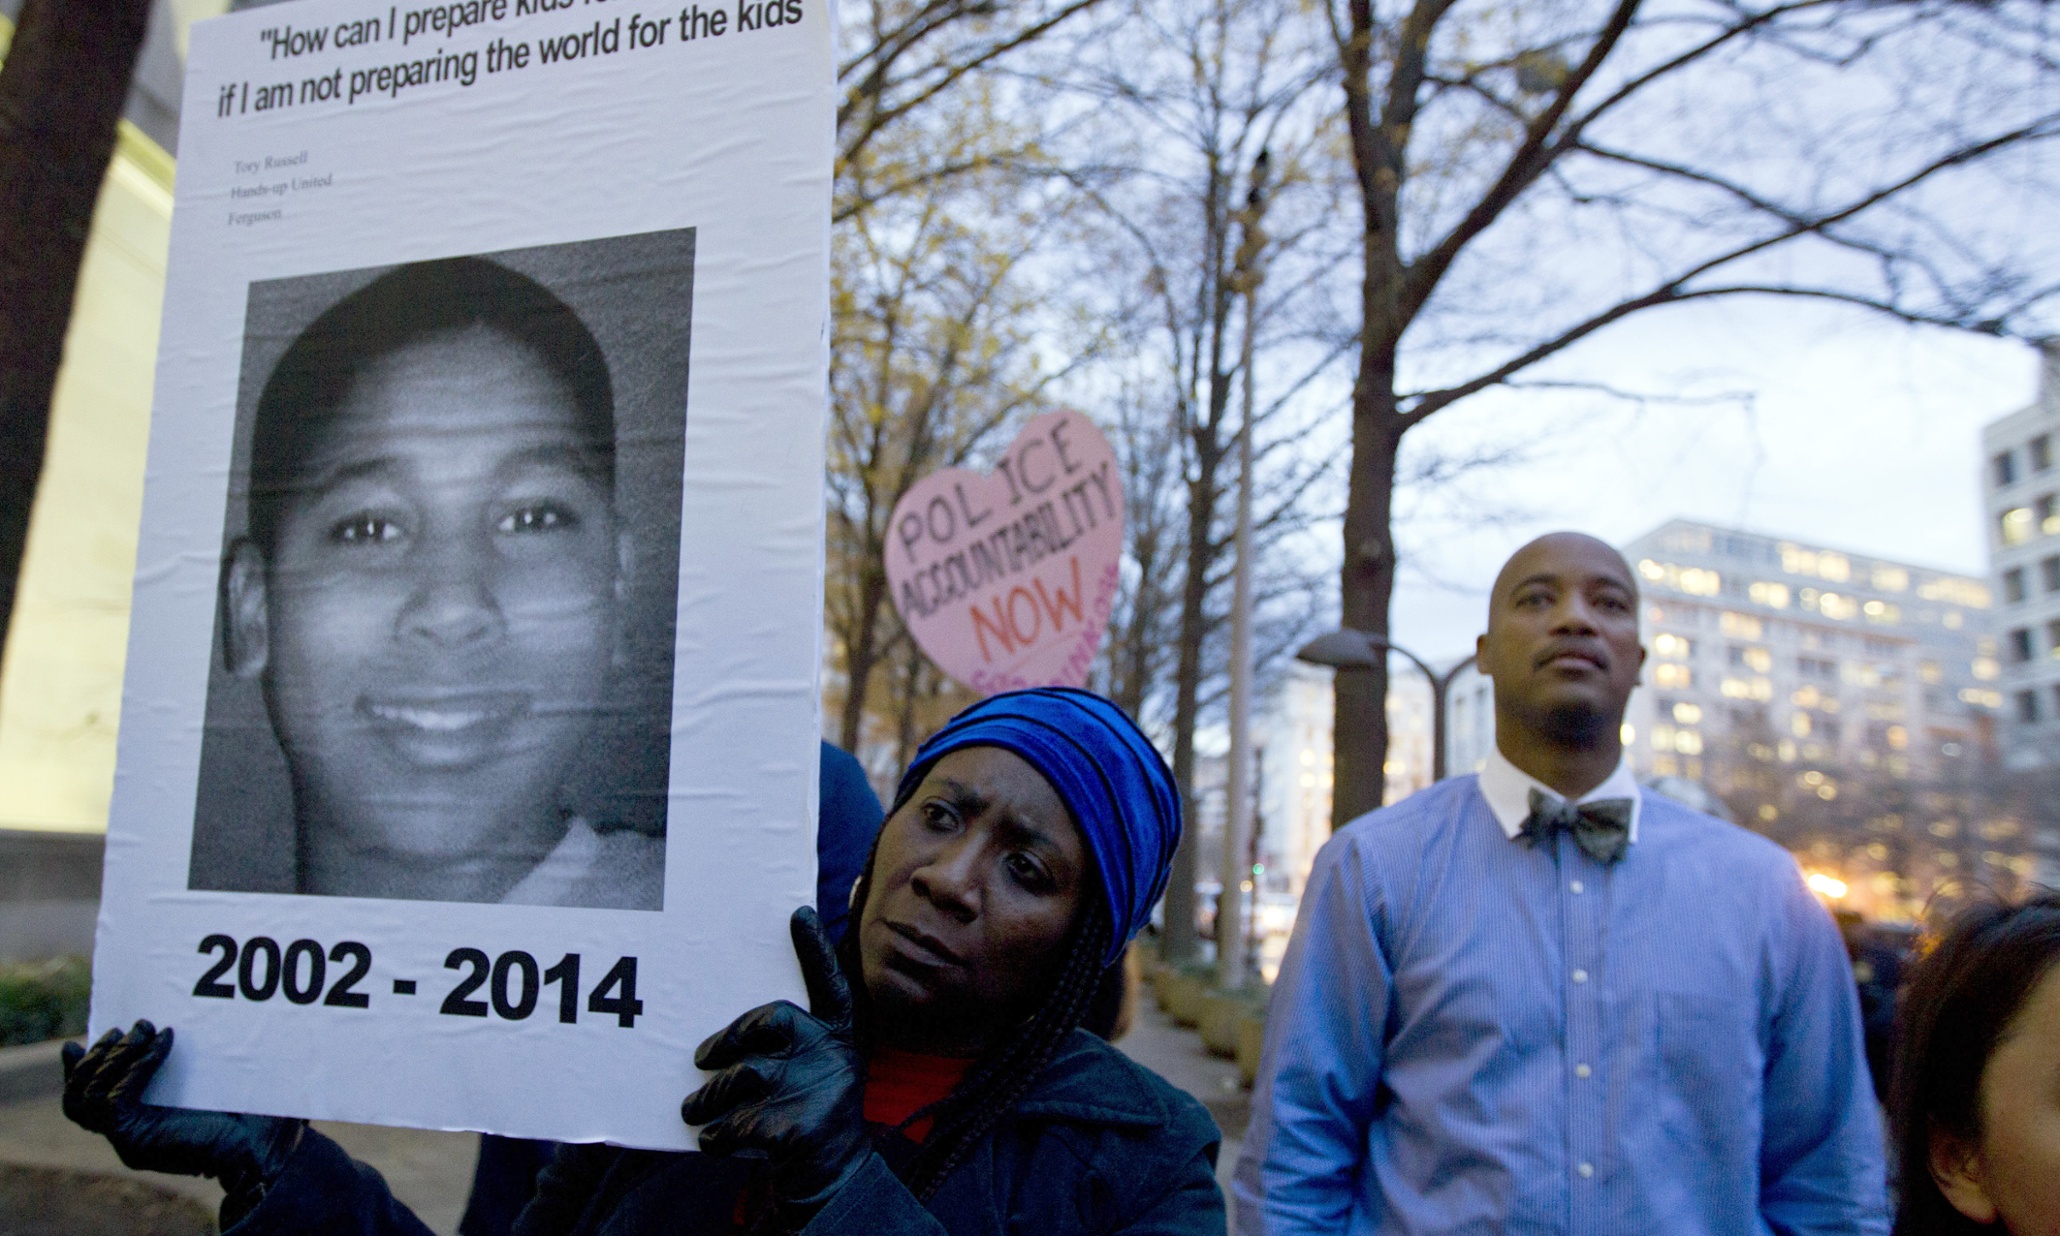 Cleveland officer who fatally shot Tamir Rice judged unfit for duty in 2012